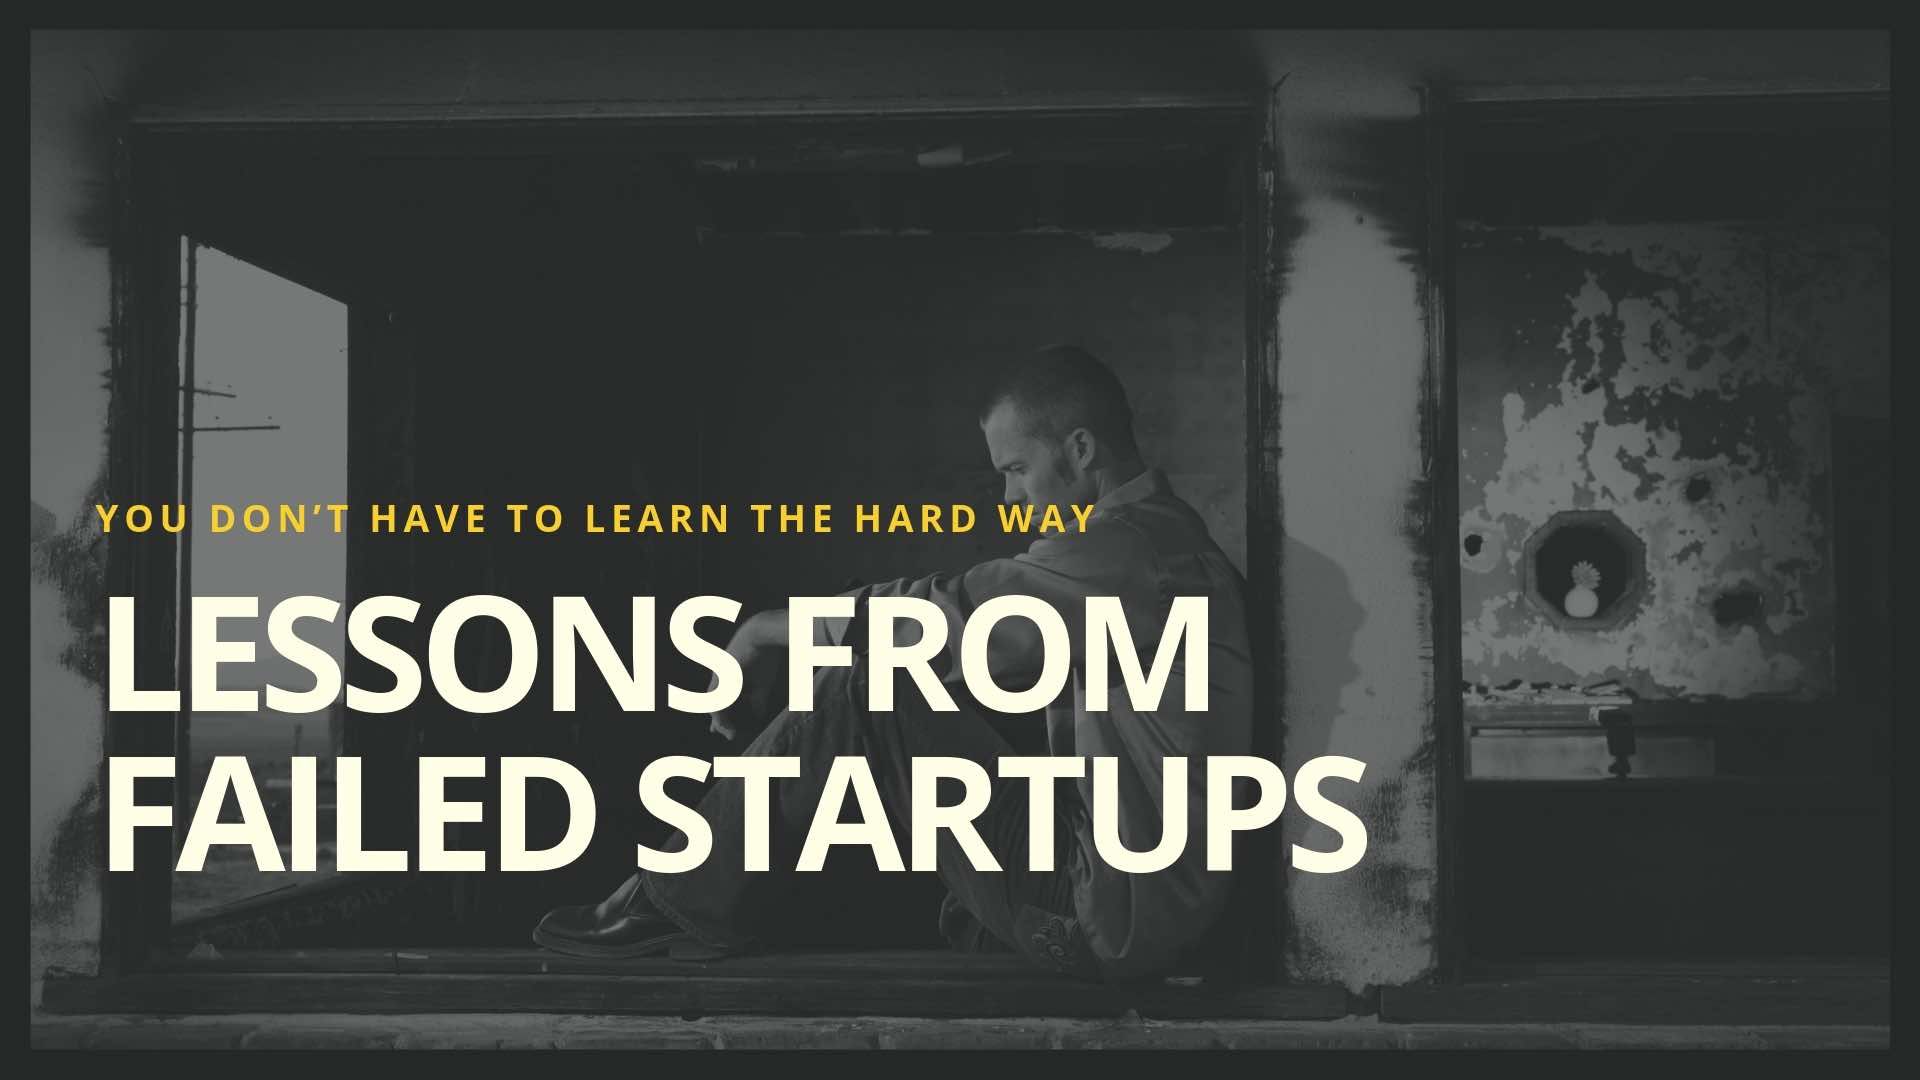 Lessons from Failed Startups: You Don’t Have to Learn the Hard Way